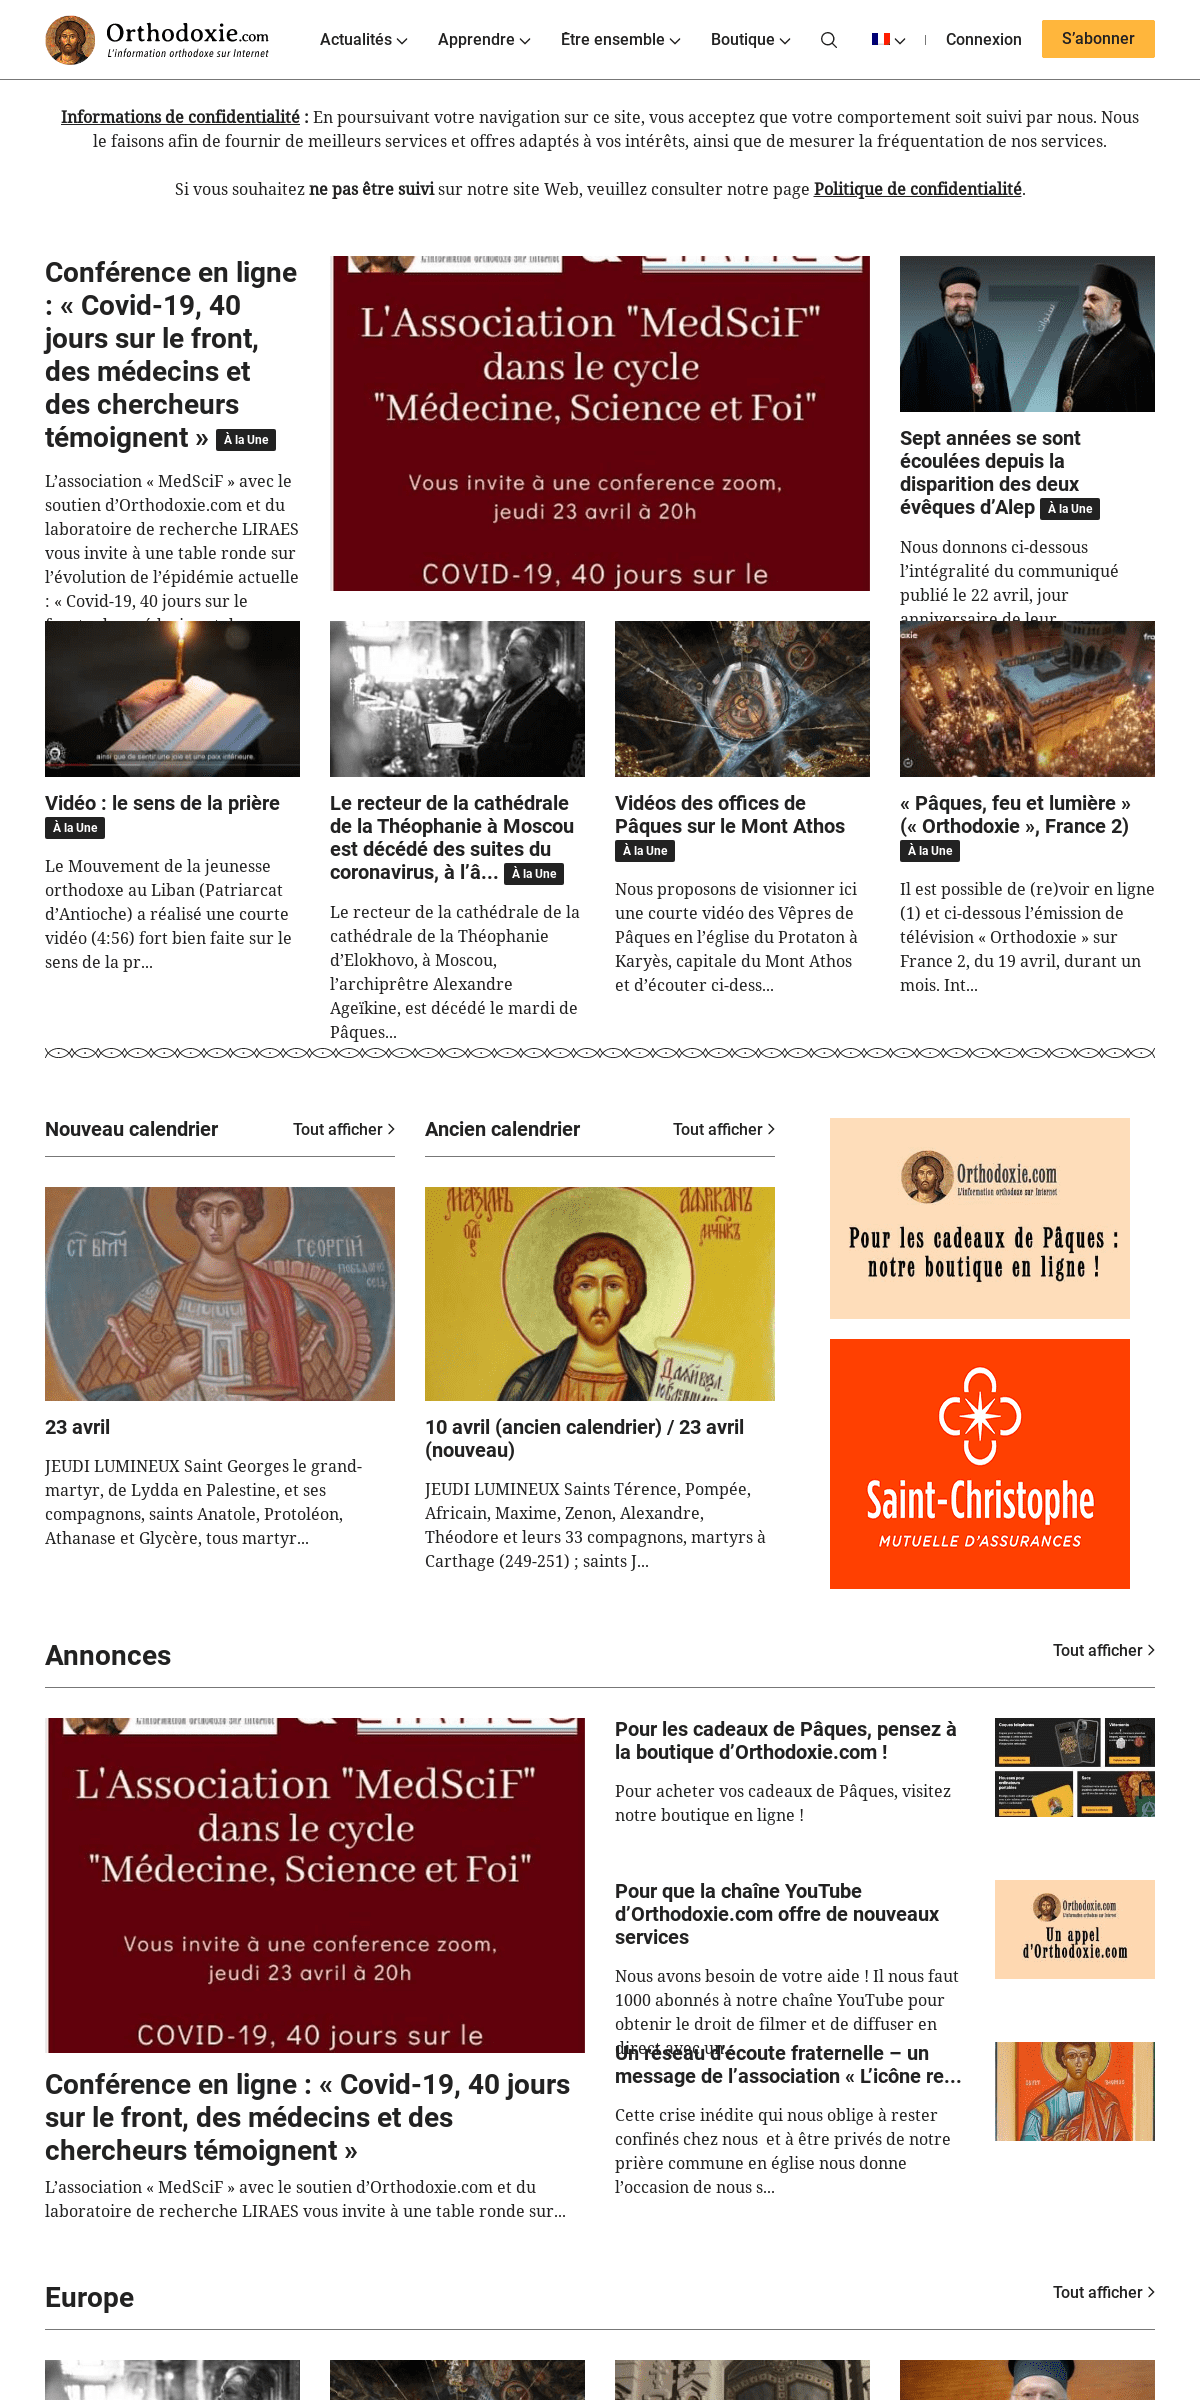 A complete backup of orthodoxie.com